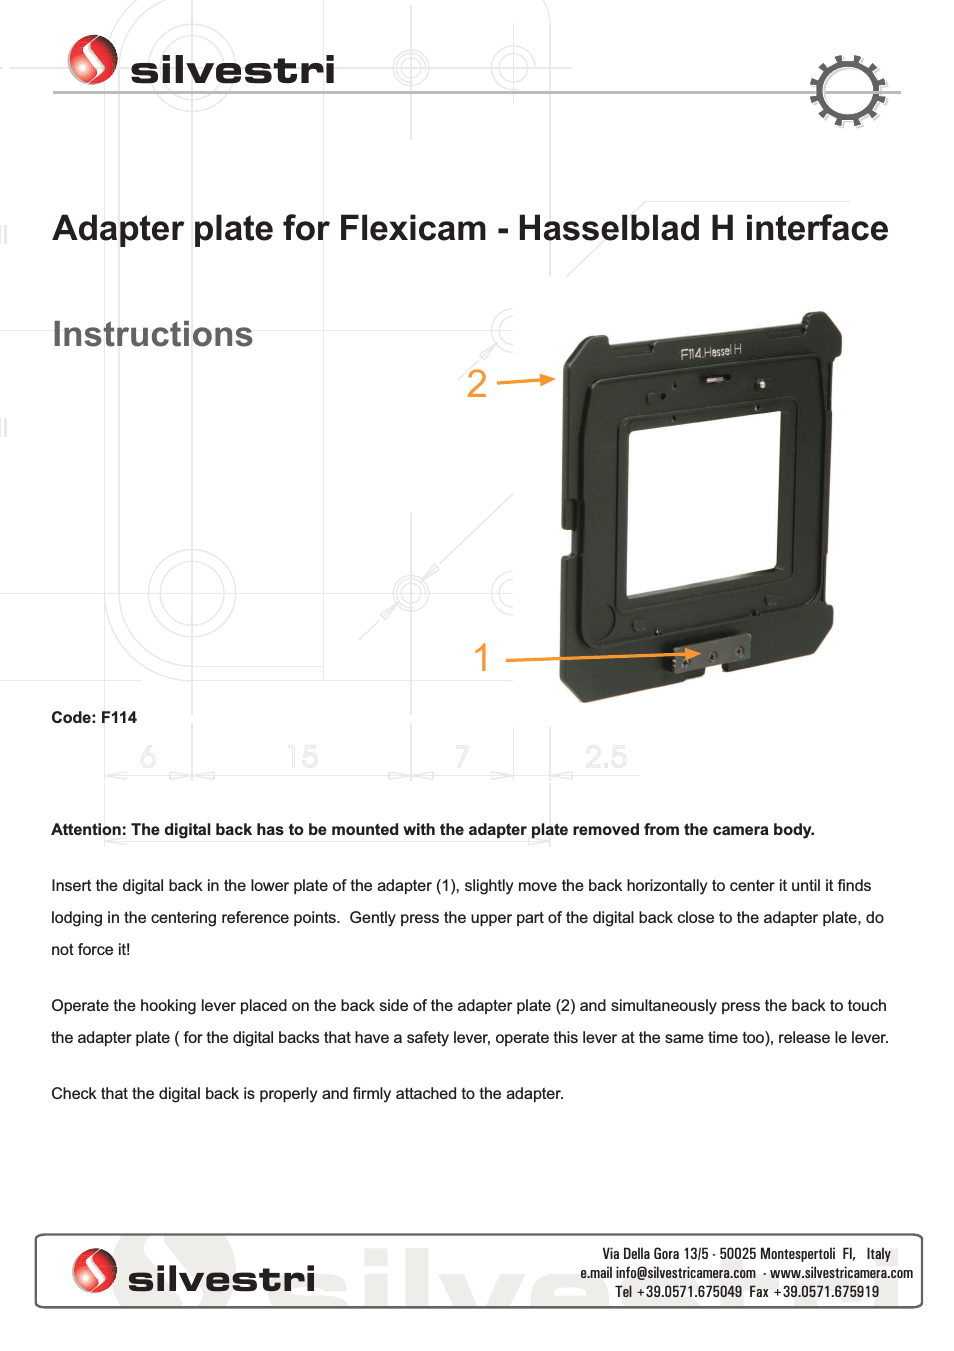 F114 Adapter plate for Hassel H on Flexicam